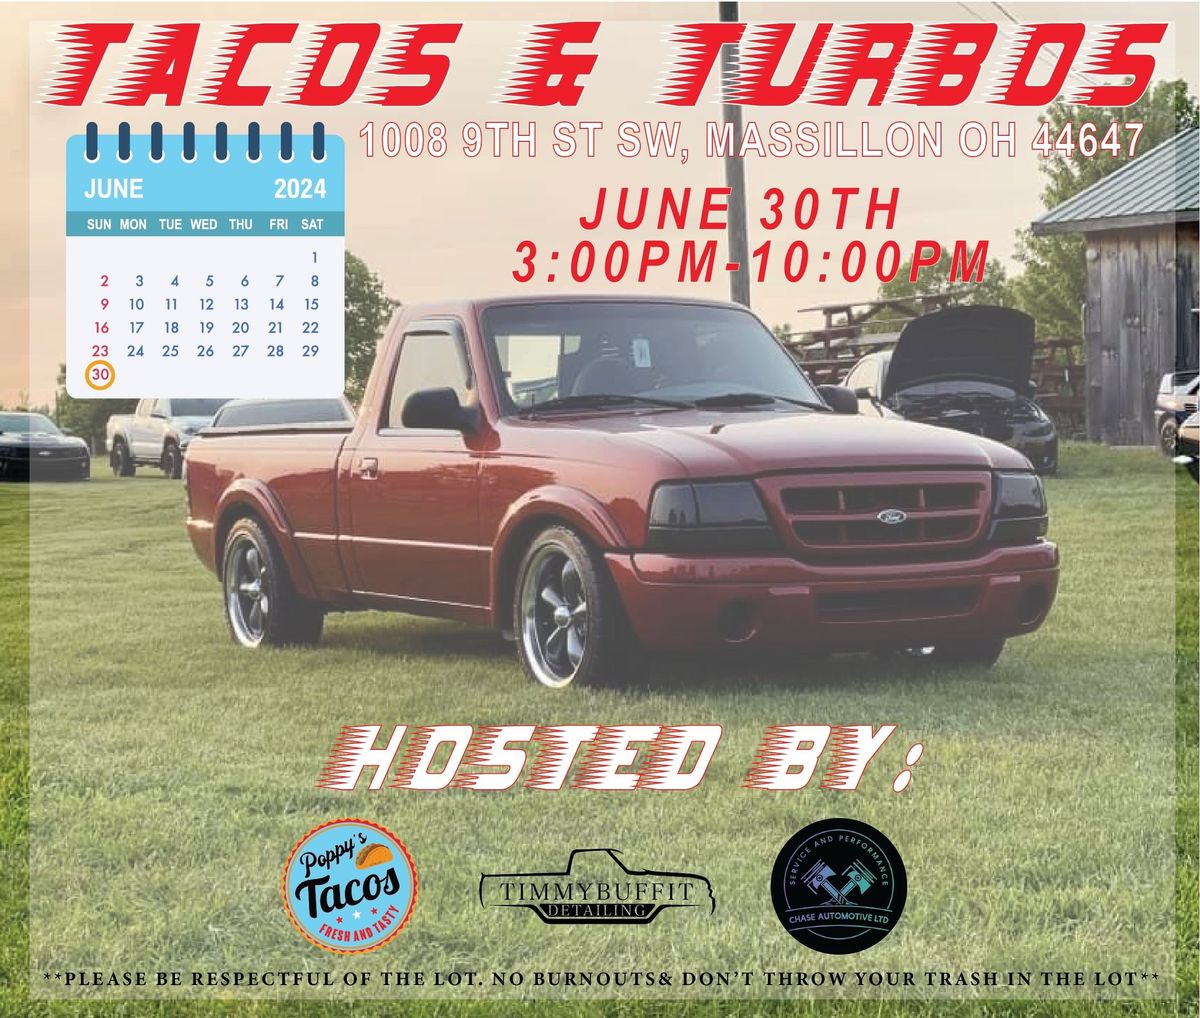 Tacos & Turbos presented by Poppys Tacos, Chase Automotive LTD & Timmybuffit